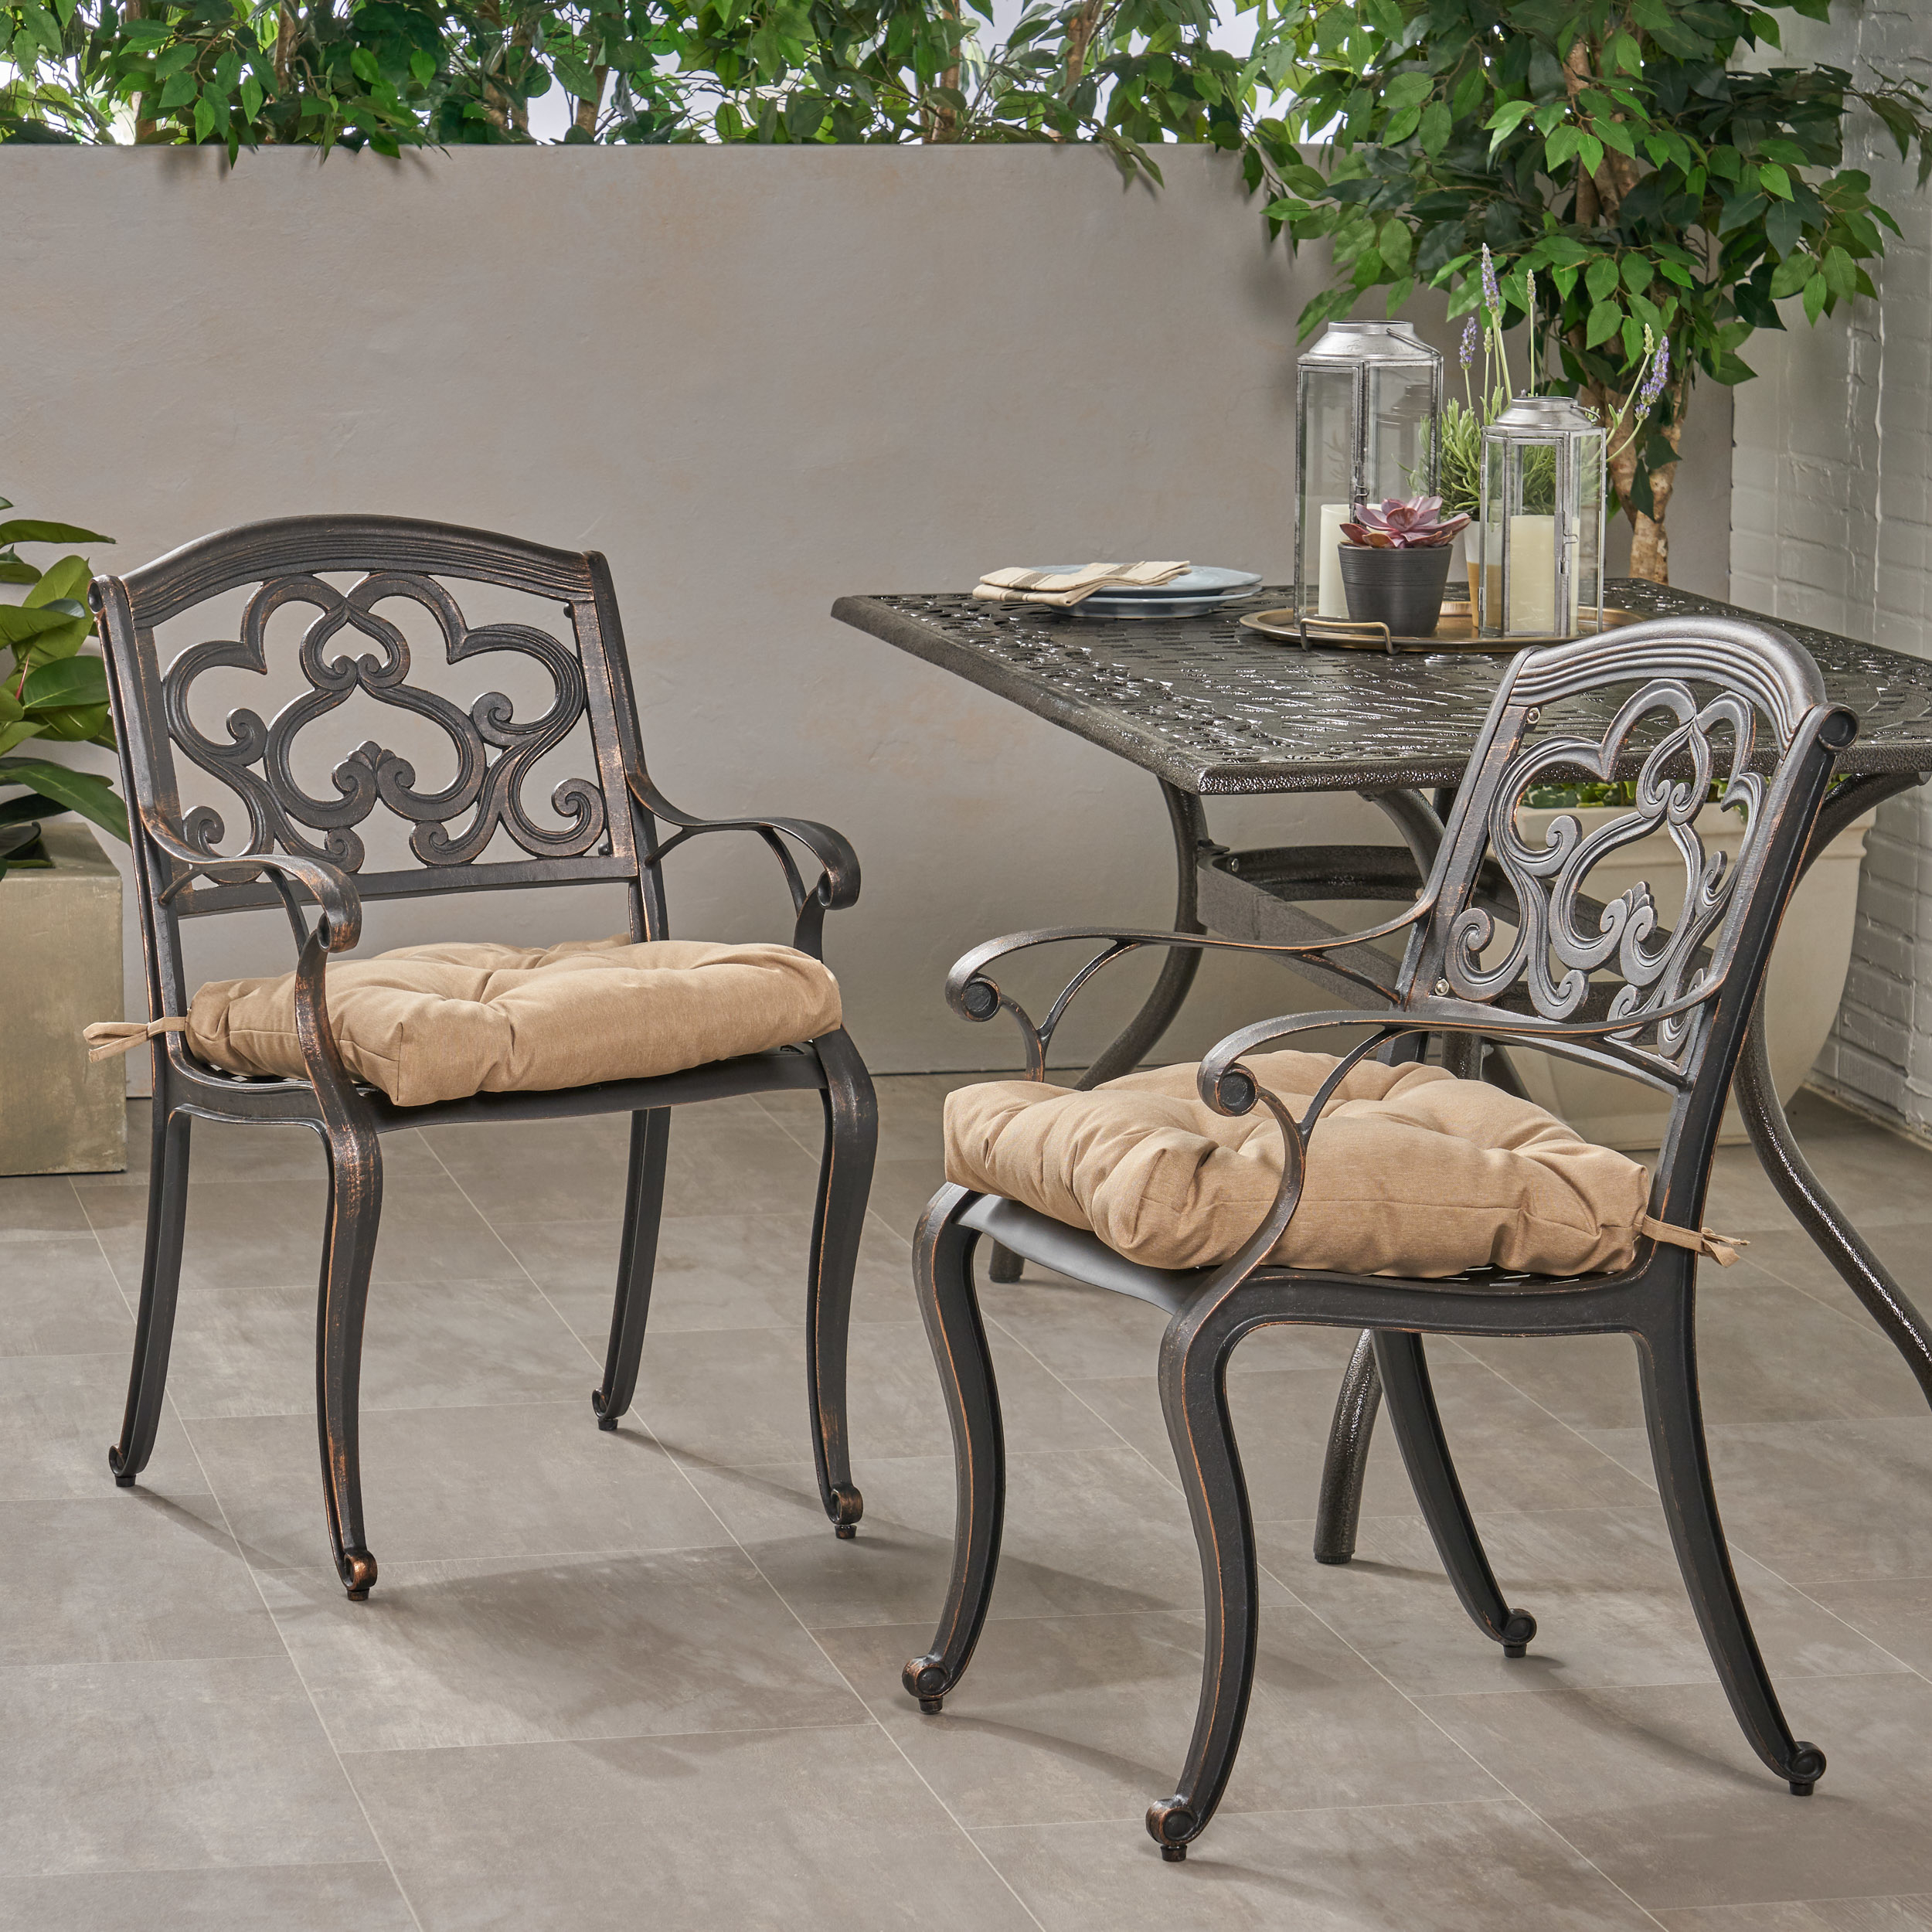 Zara Outdoor Dining Chair with Cushion (Set of 2) - shiny copper + tuscany